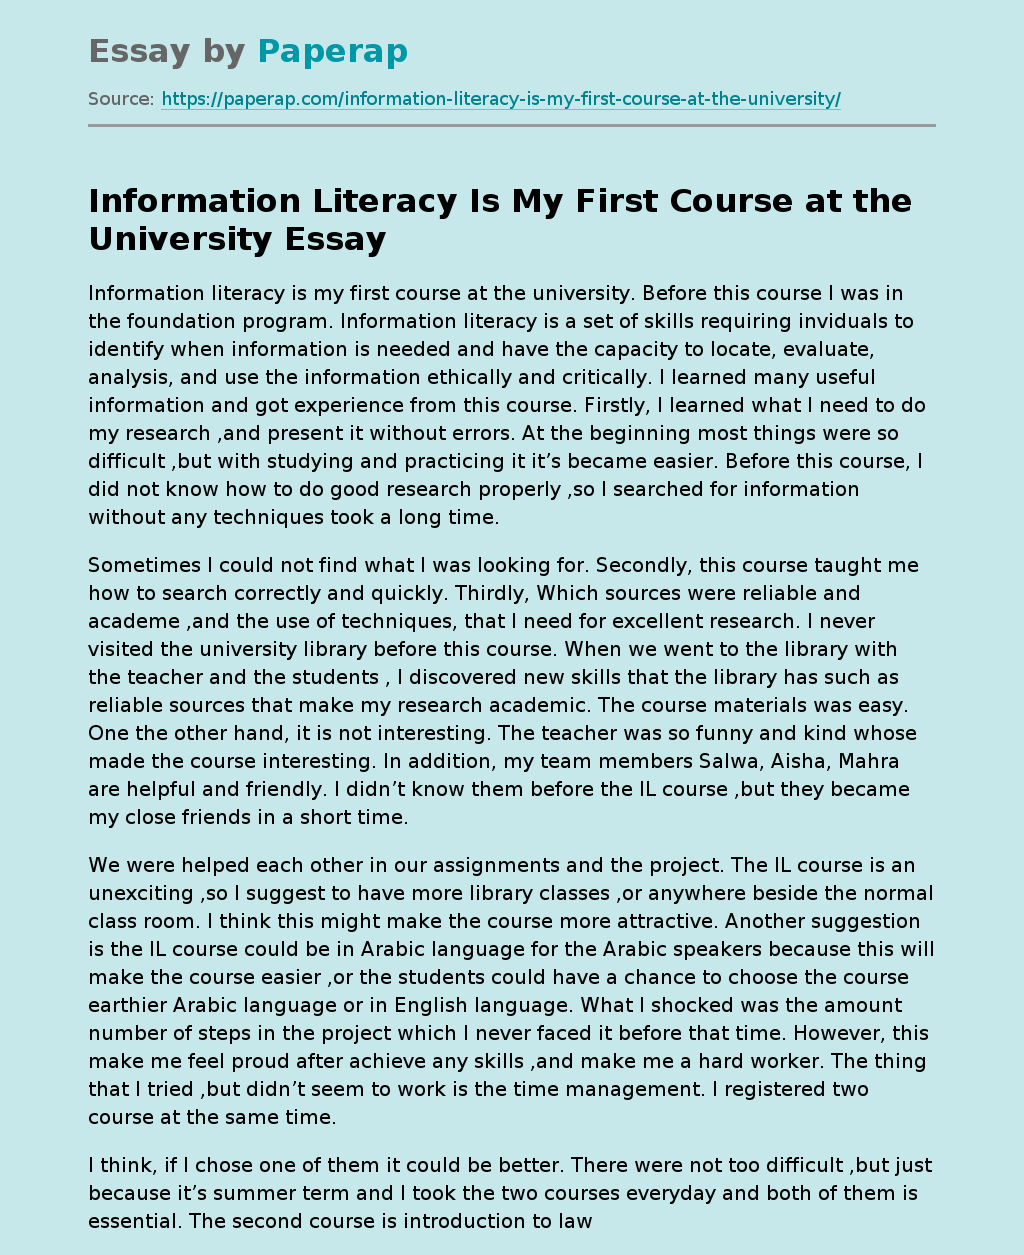 Information Literacy Is My First Course at the University